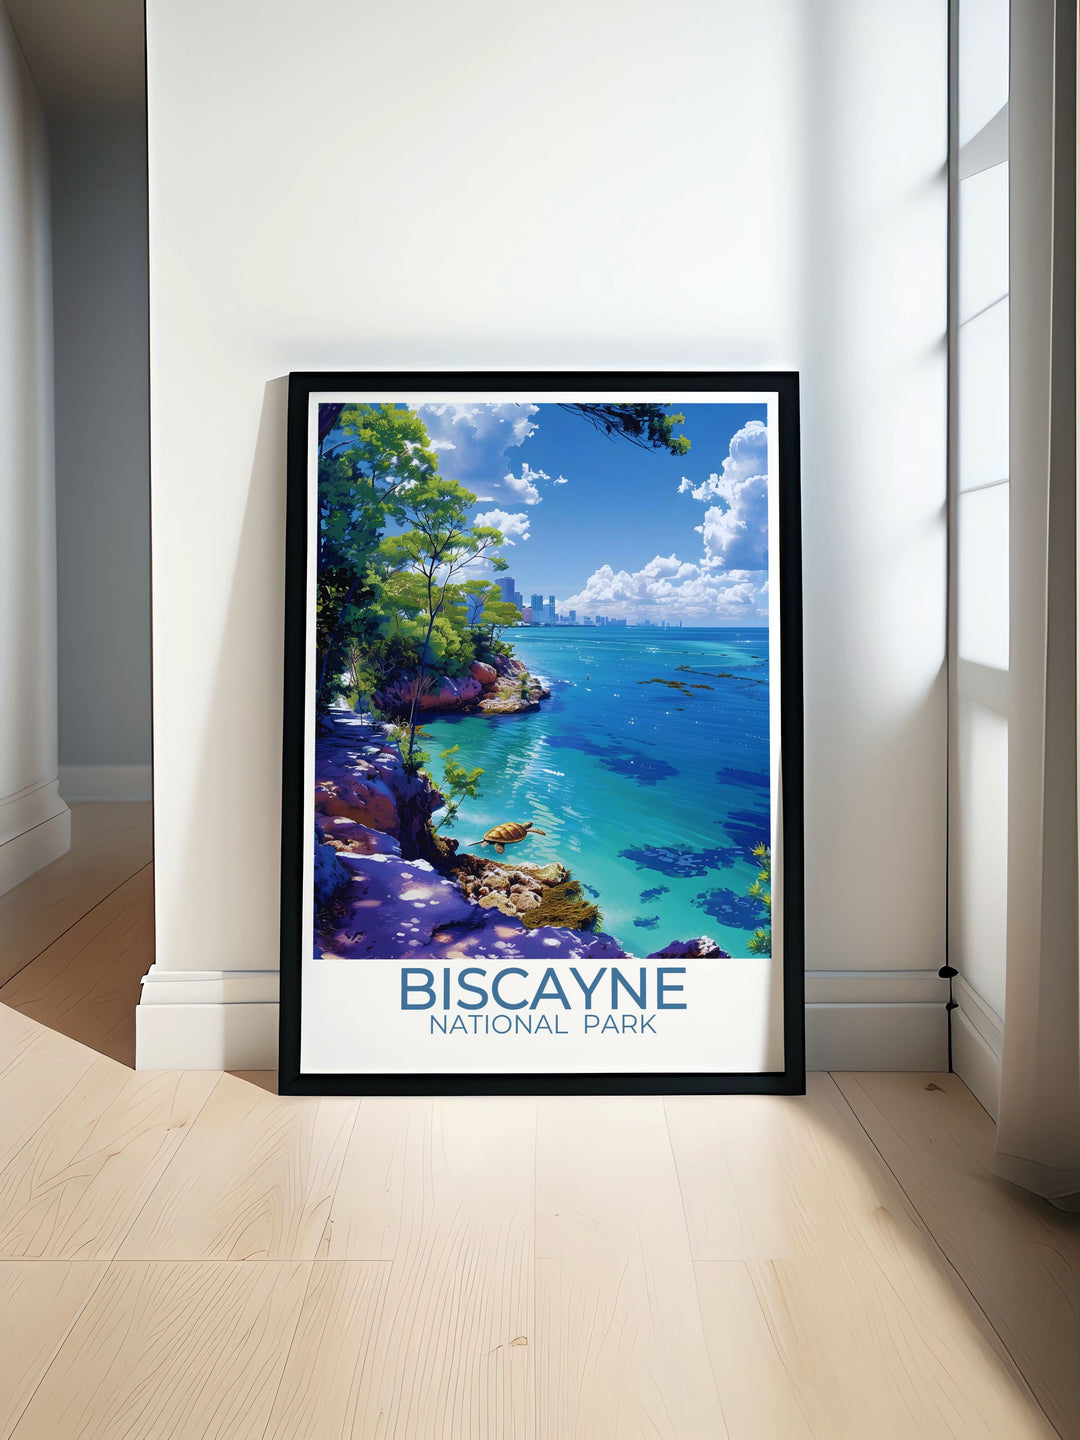 Unique artwork of Biscayne National Park featuring Biscayne Bay Trail and coral reefs, perfect for personalized gifts or home decor. This print captures the essence of Floridas most scenic national park.